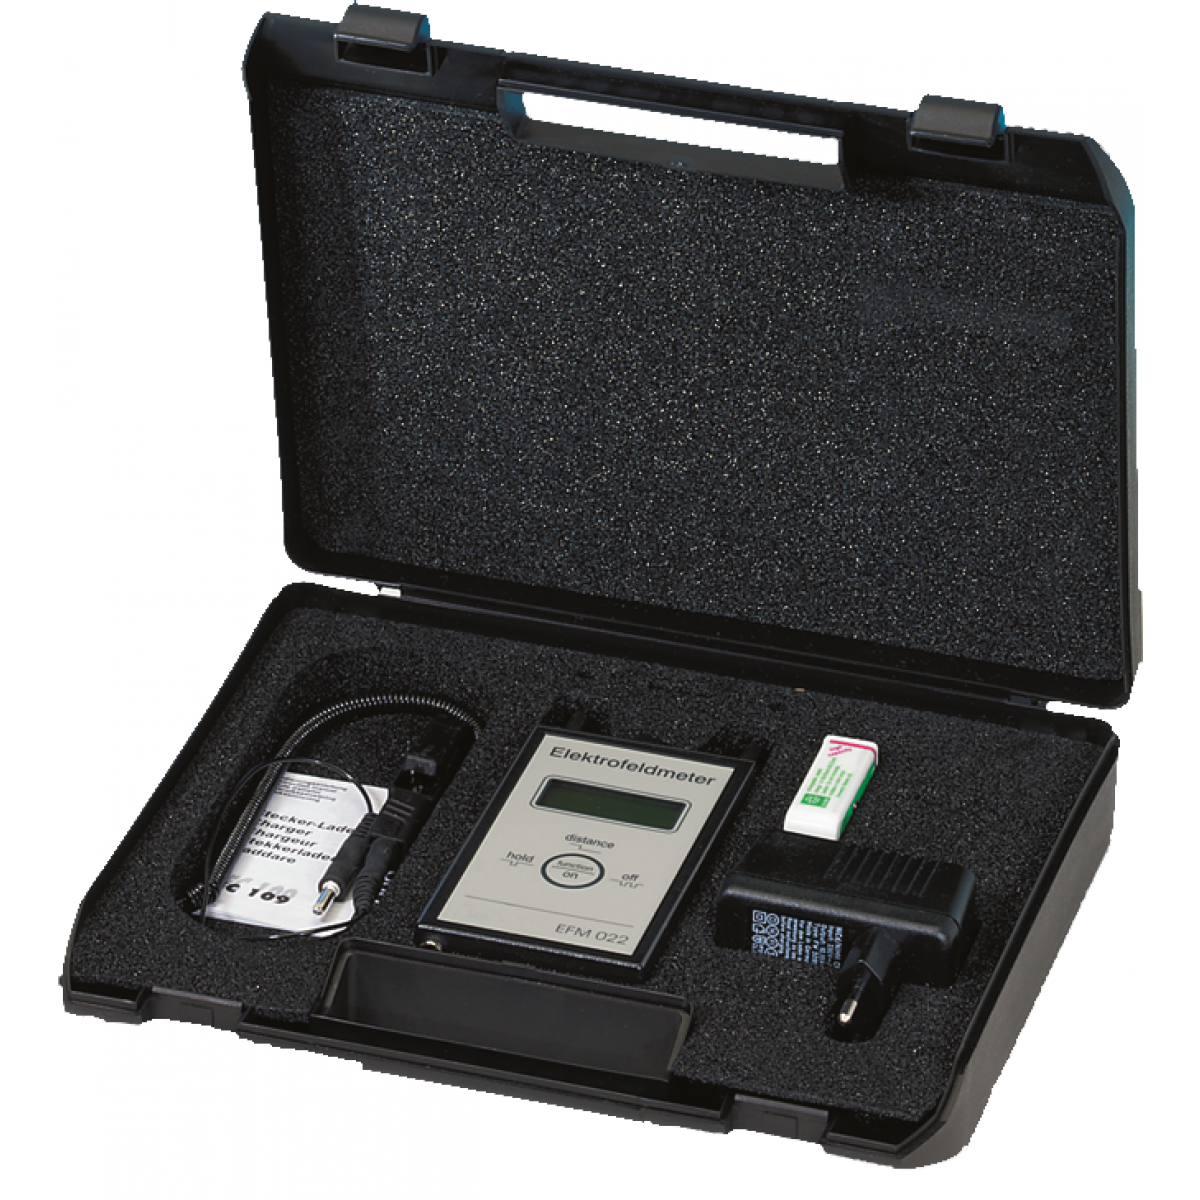 Variation:Electric field meter EFM 022 with accessory set, incl. calibration certificate